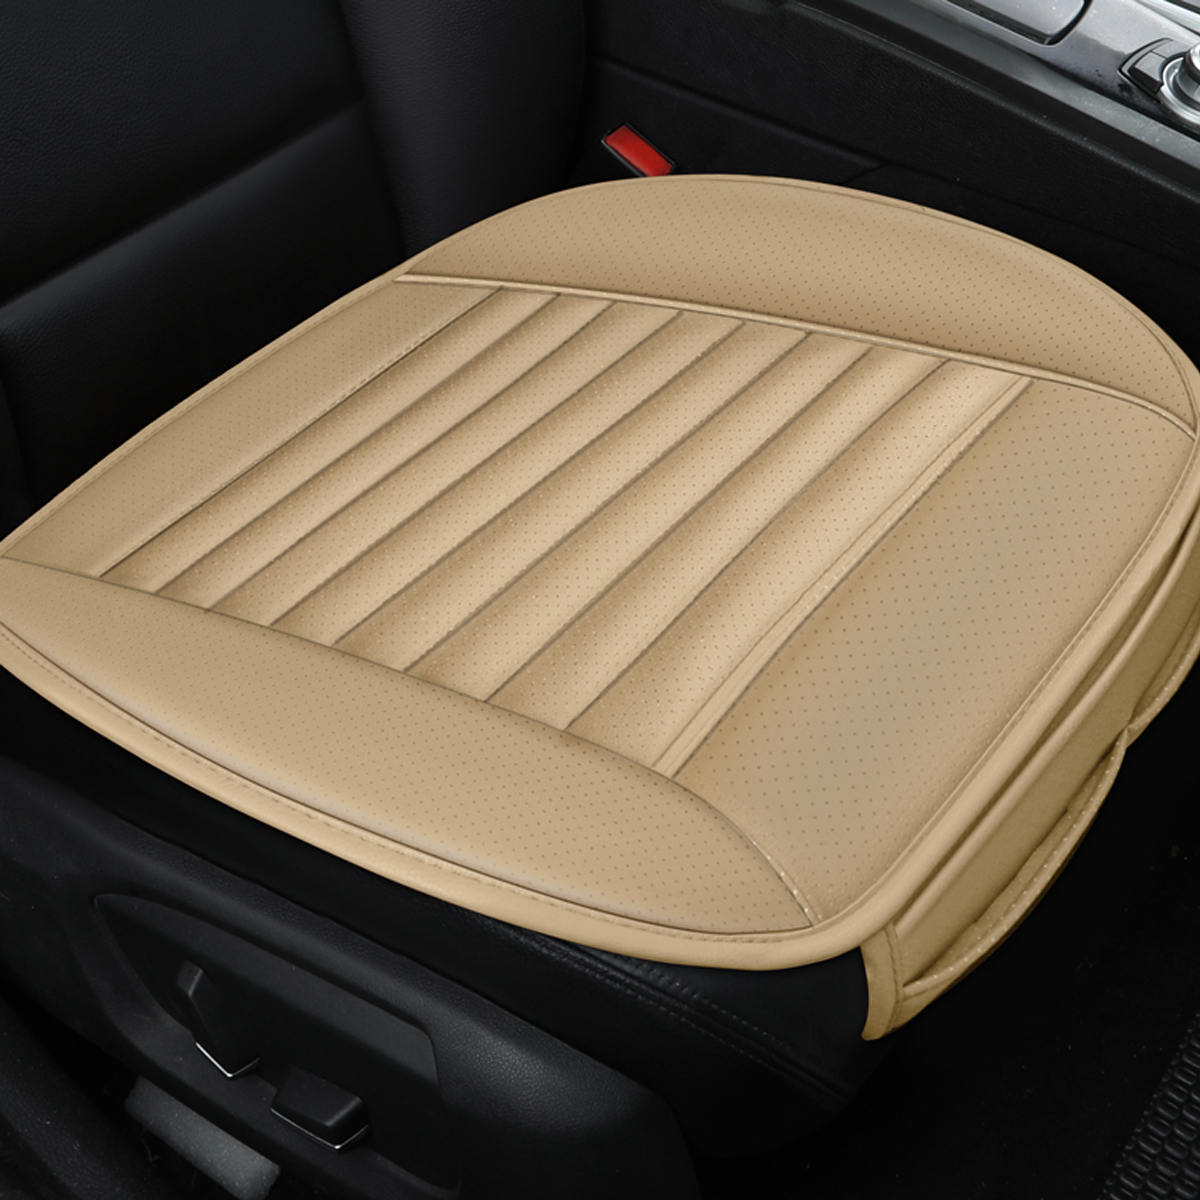 3 pcs 1Rear+2Front Car Universal Seat Cover Bamboo Breathable PU Leather Pad Chair Cushion US - image 3 of 12